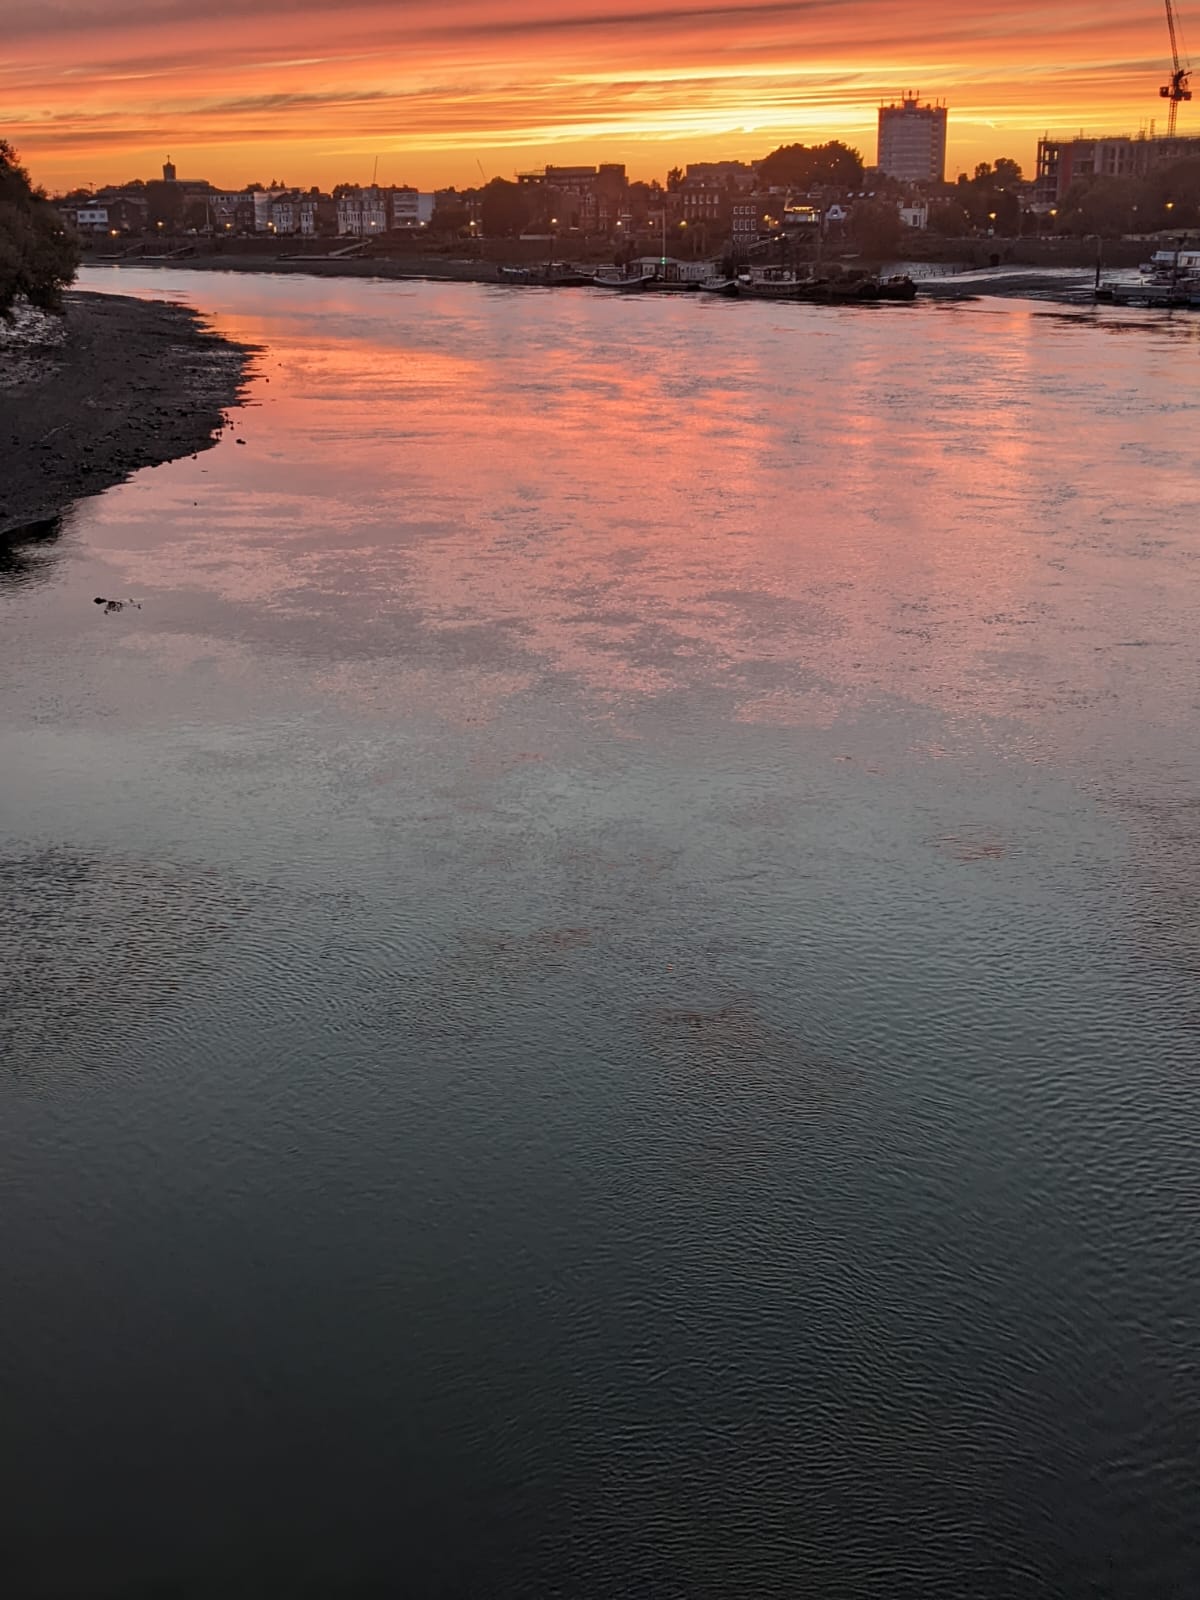 Pink sunset over river with buildings in distance